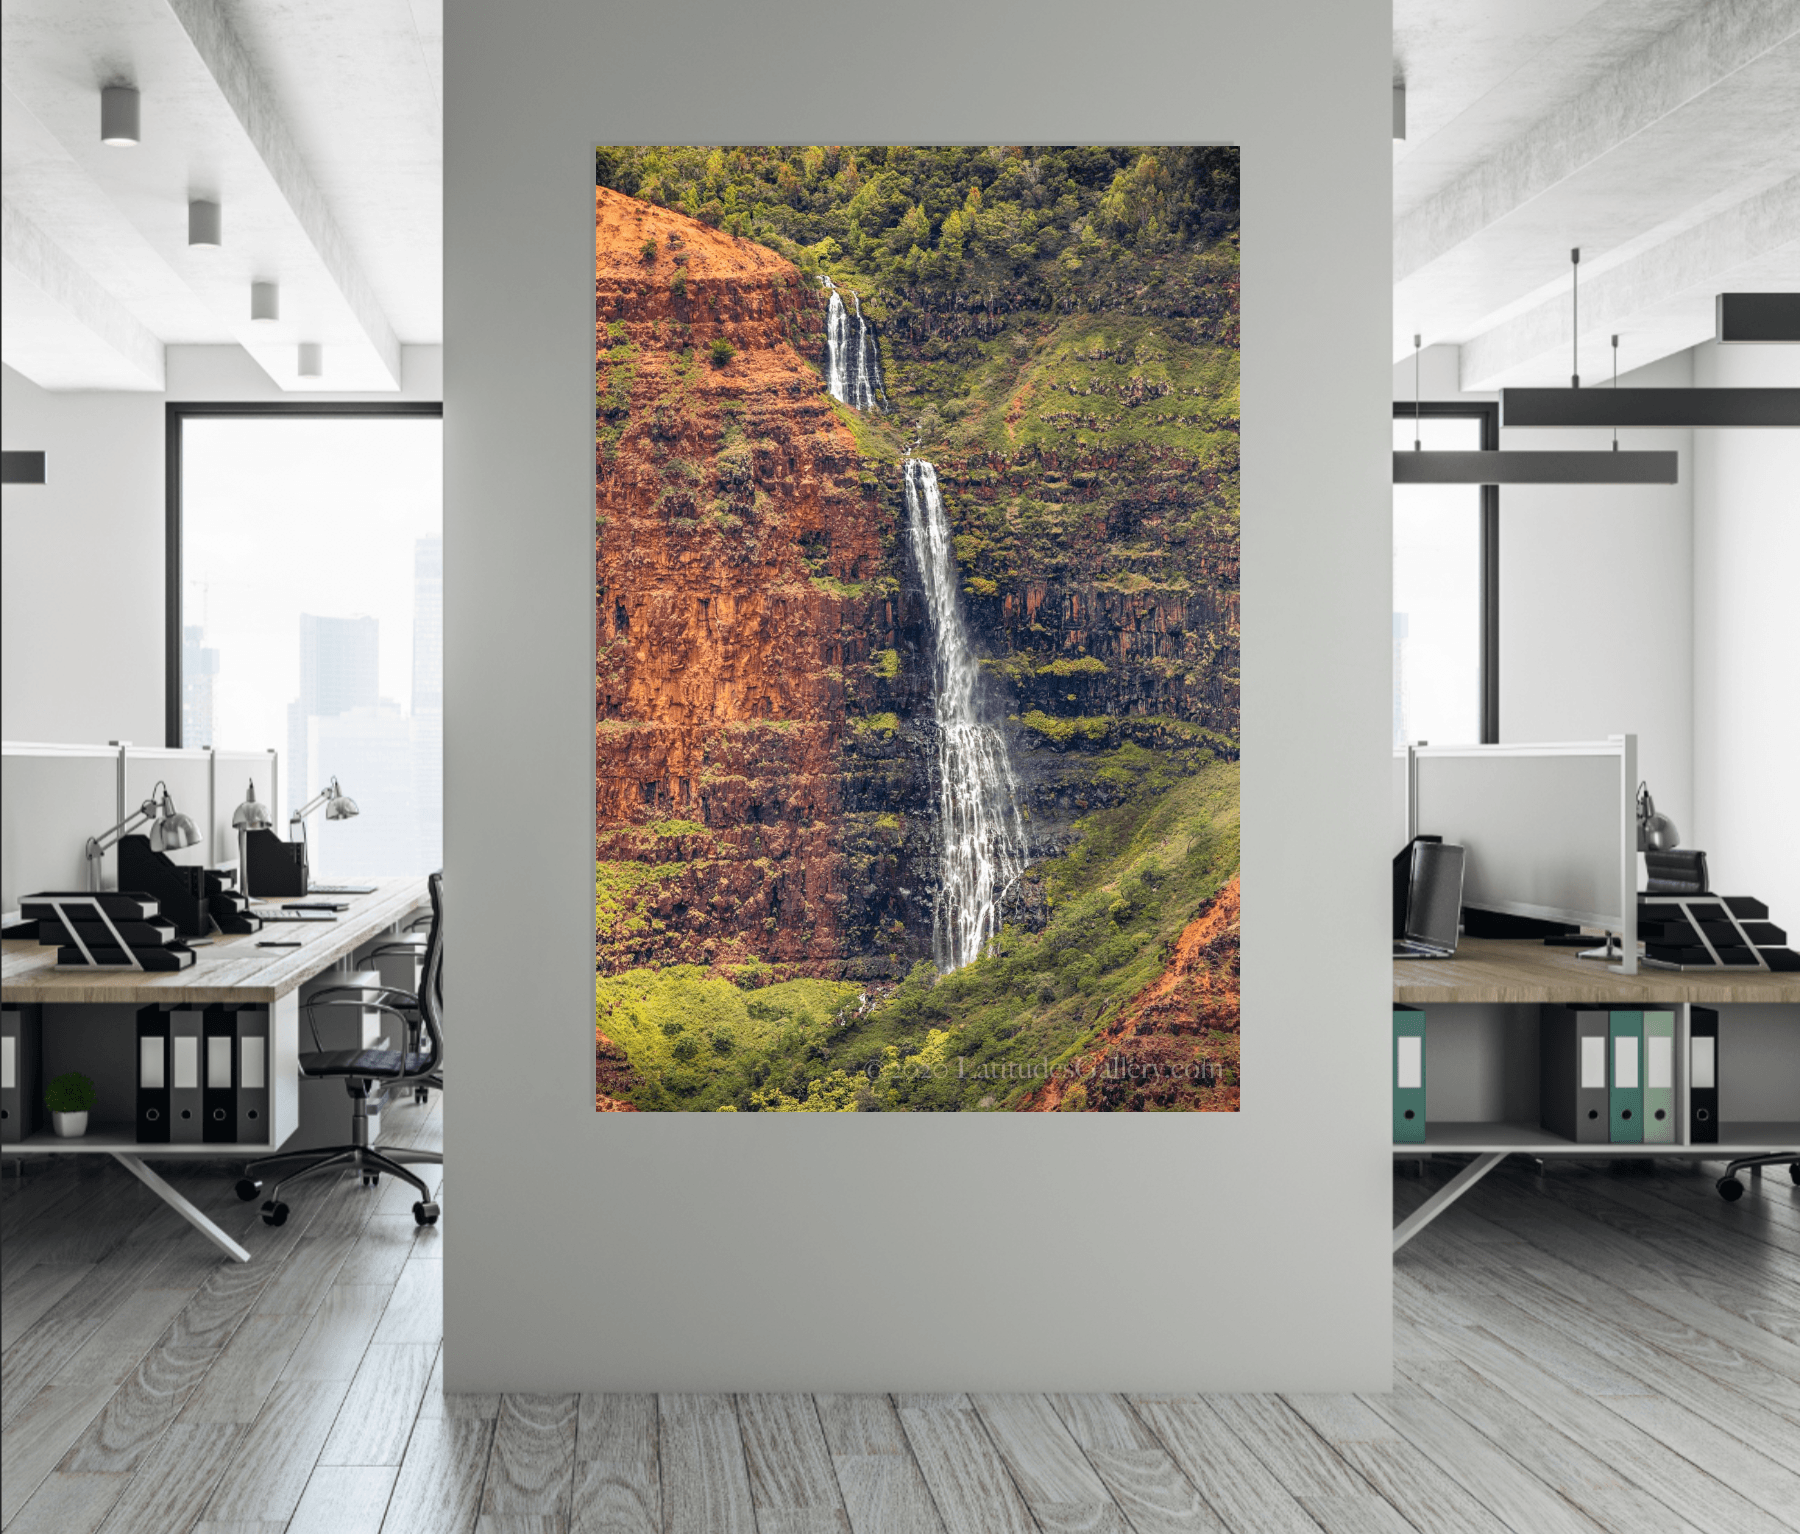 Large unique wall art of a massive waterfall in an office setting.